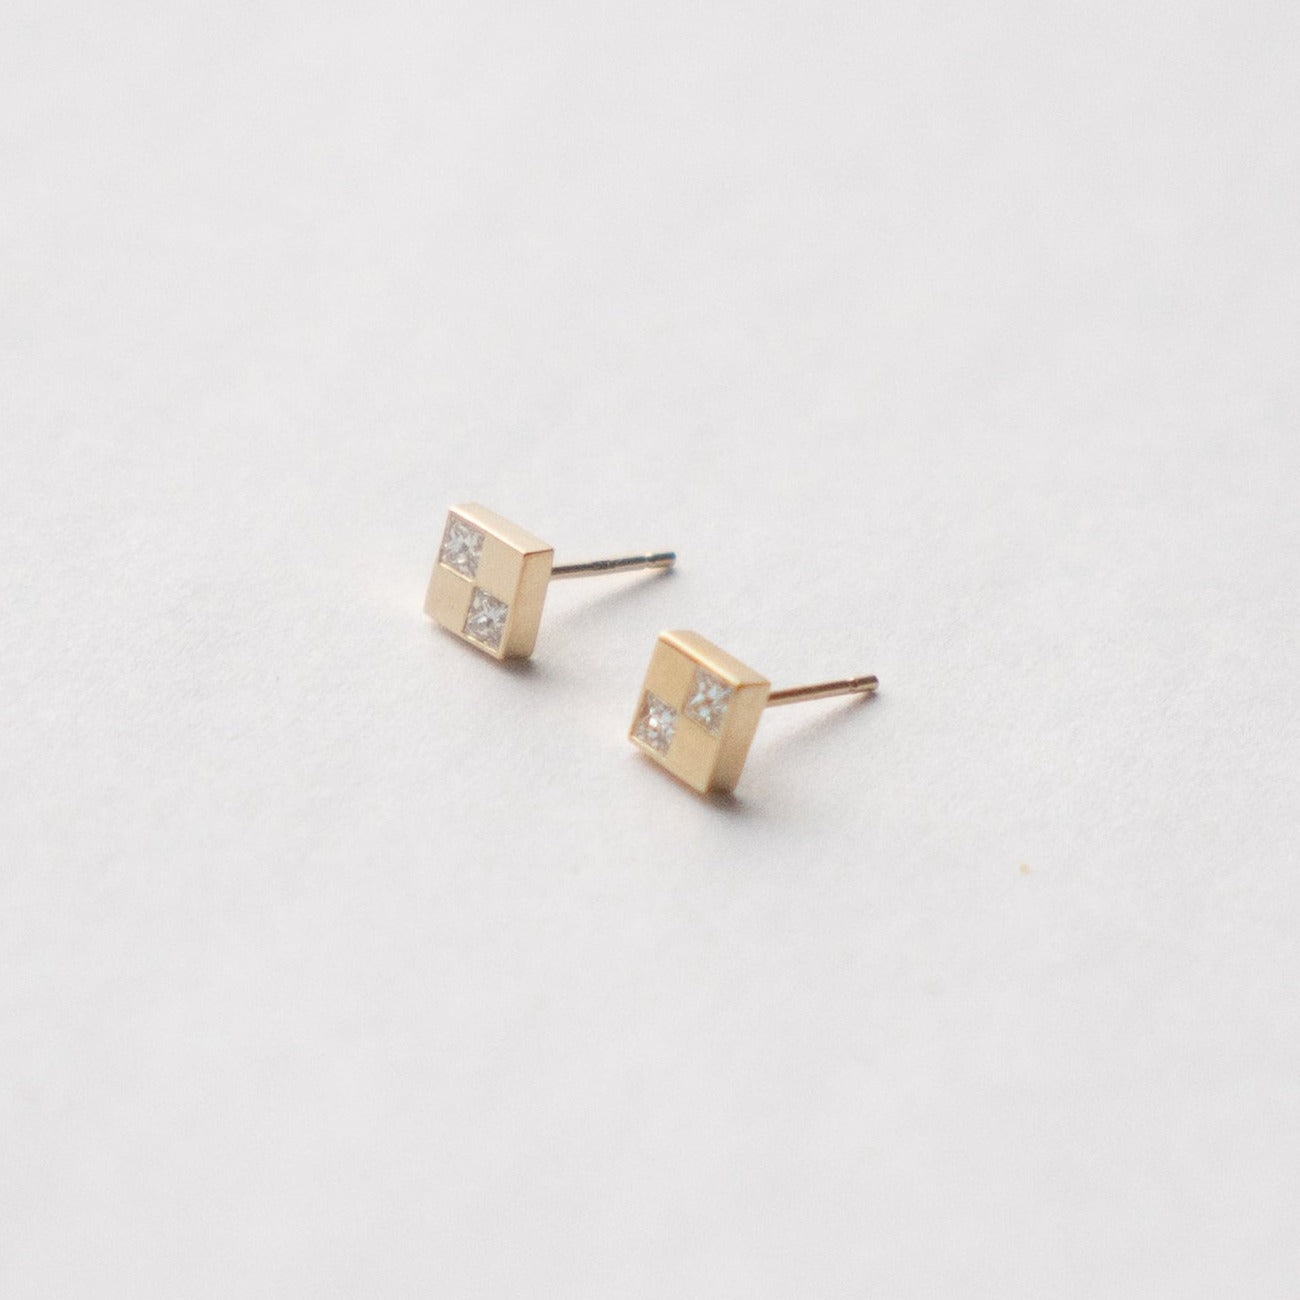 Minimalist Sudu Stud Earrings in 14k Yellow Gold and Natural White Diamonds by SHW fine Jewelry in NYC